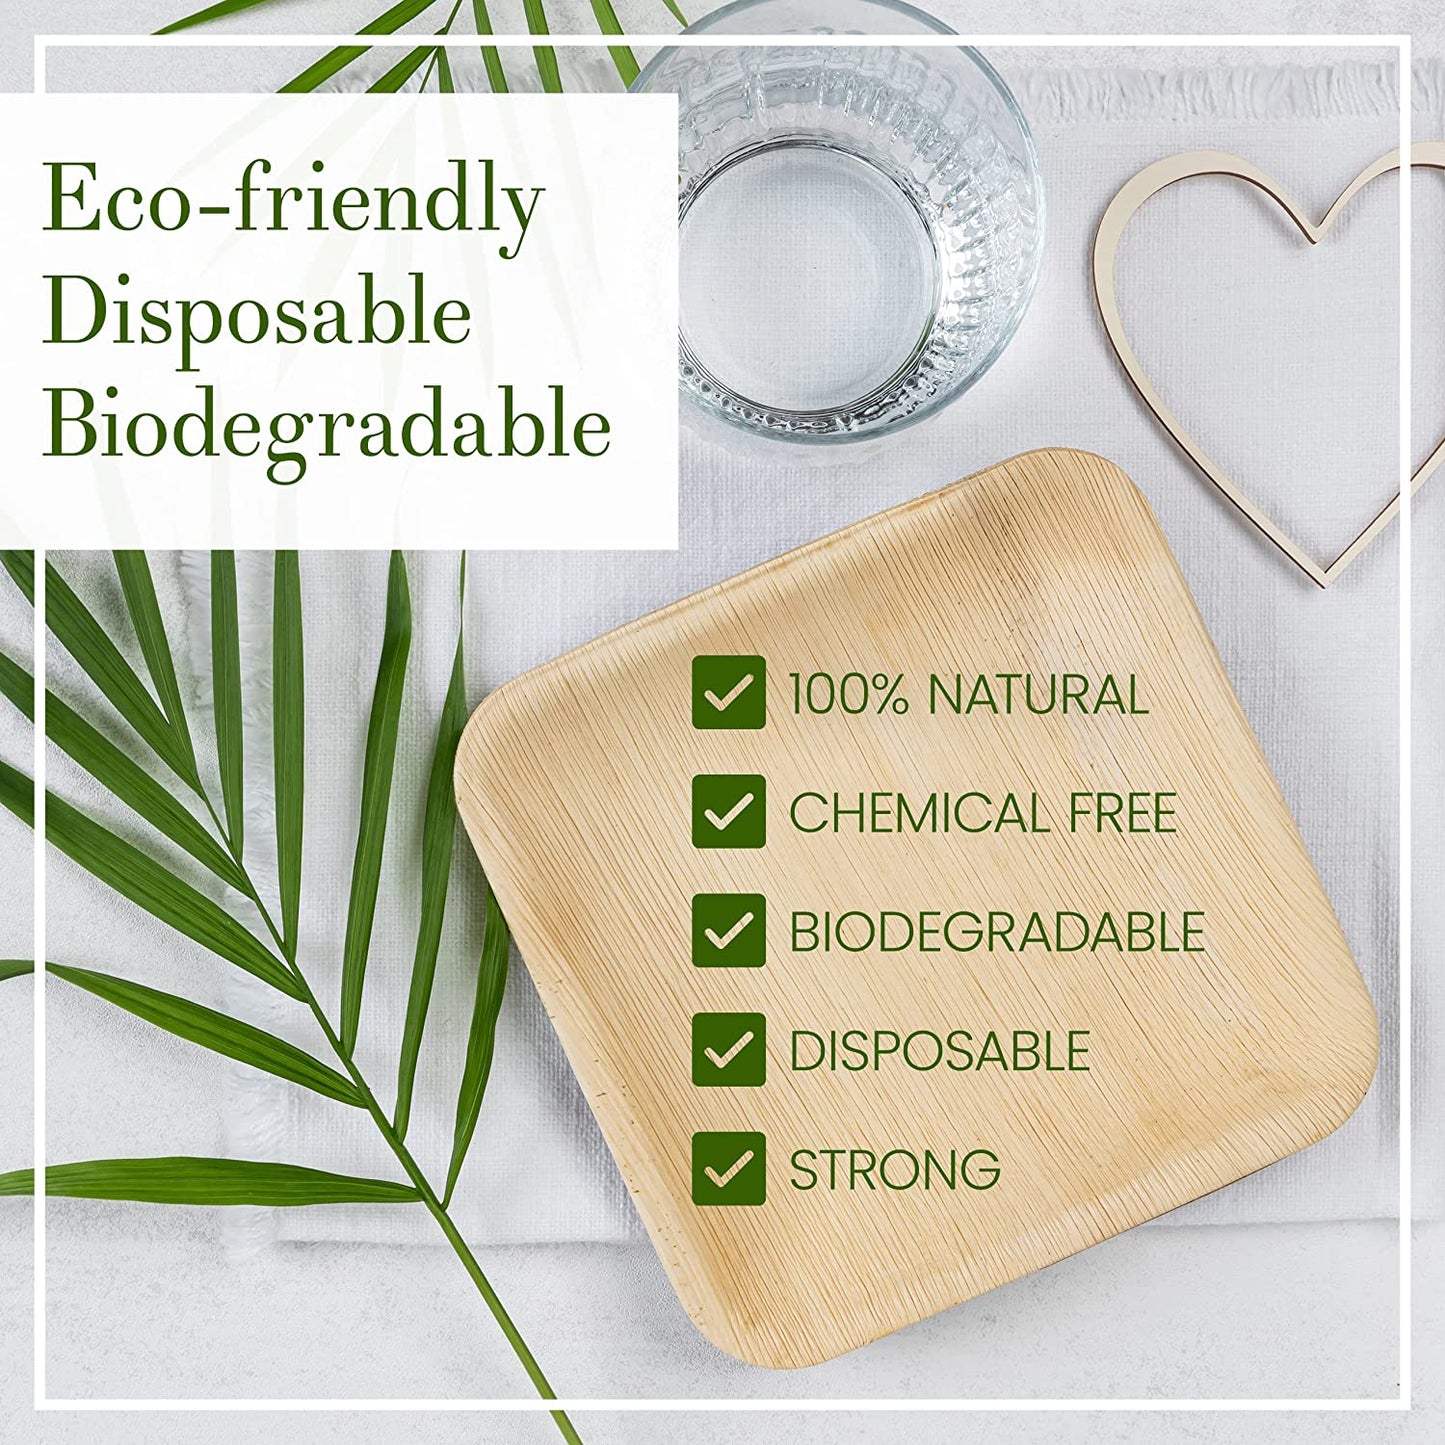 Palm Leaf Plates - Compostable and Grease Resistant 6 Inch Square Plates - Eco Friendly Plate Is 100% Natural, Sturdy & Microwave Safe - Disposable & Biodegradable Wood Alternative to Bamboo Plates